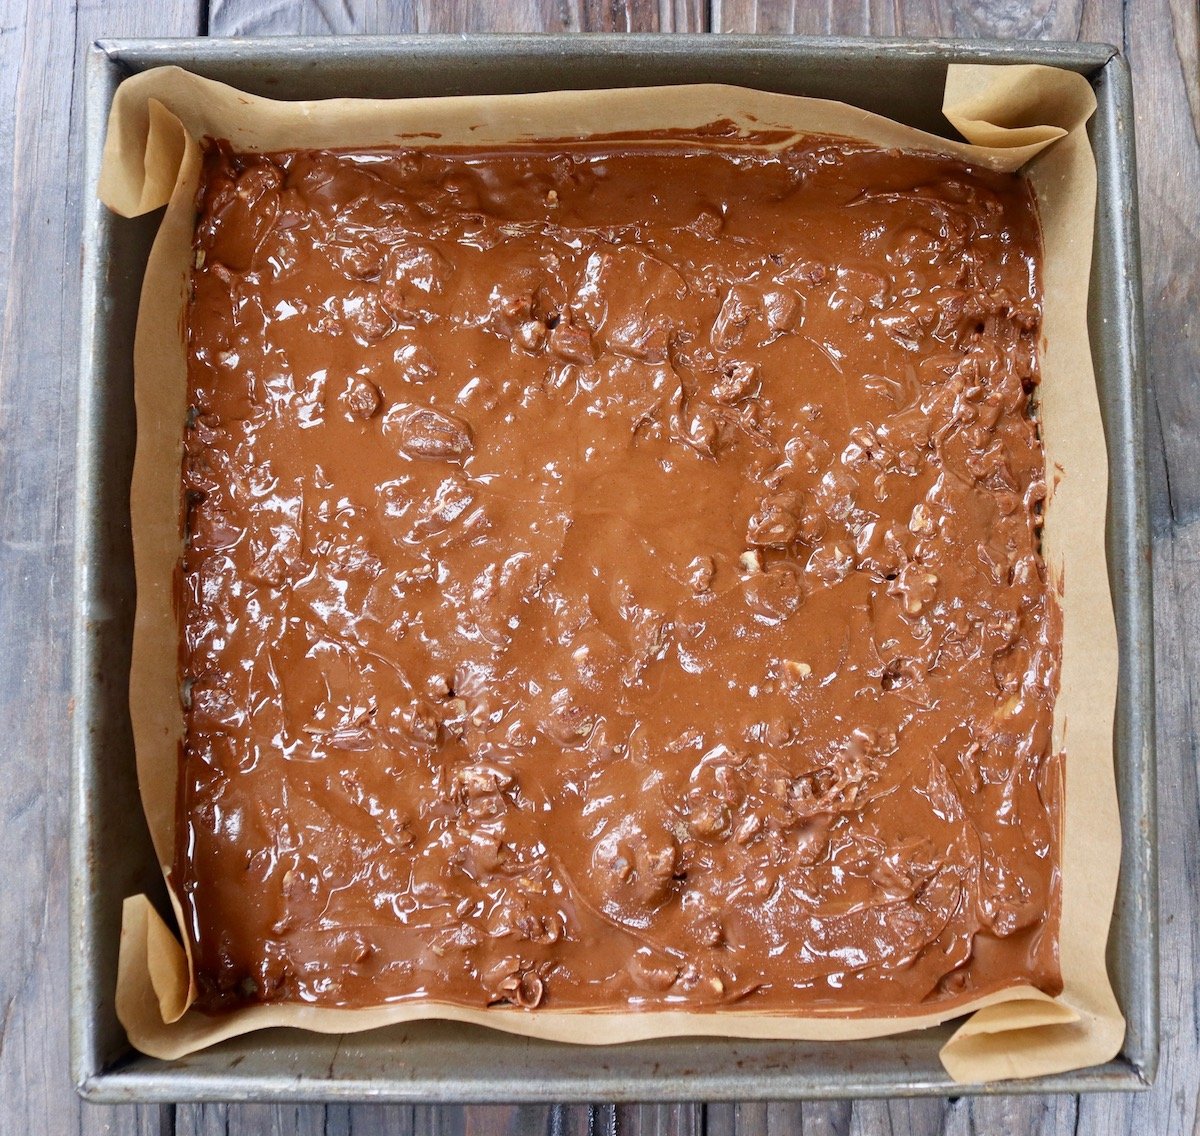 Chocolate filling a parchment paper-lined square baking pan.